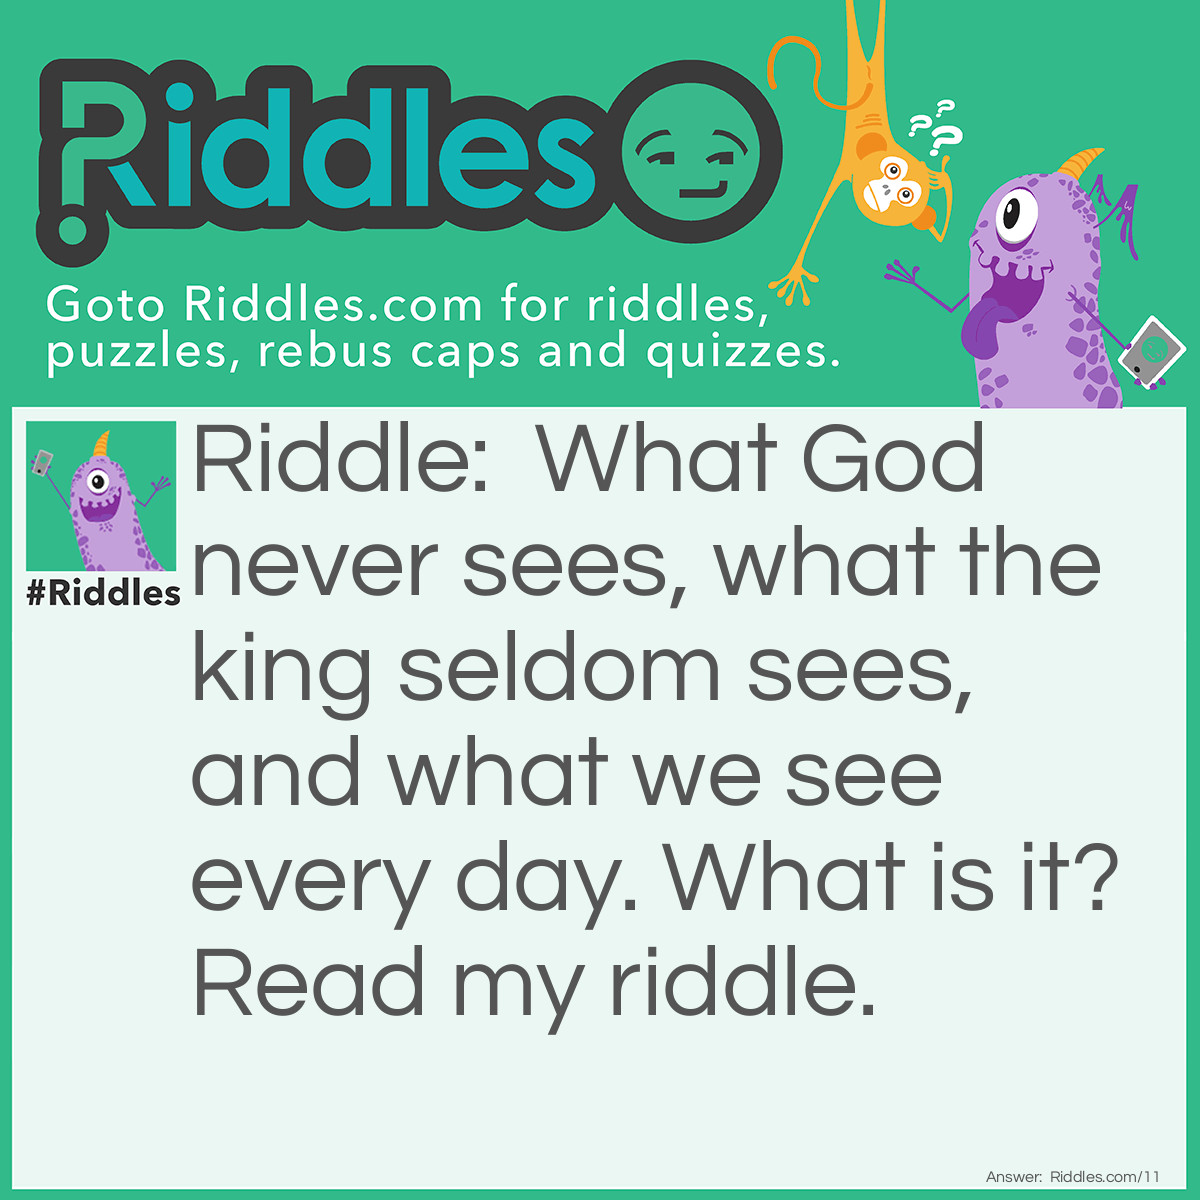 Riddle: What God never sees, what the king seldom sees, and what we see every day. What is it? Read my <a>riddle</a>. Answer: An equal.